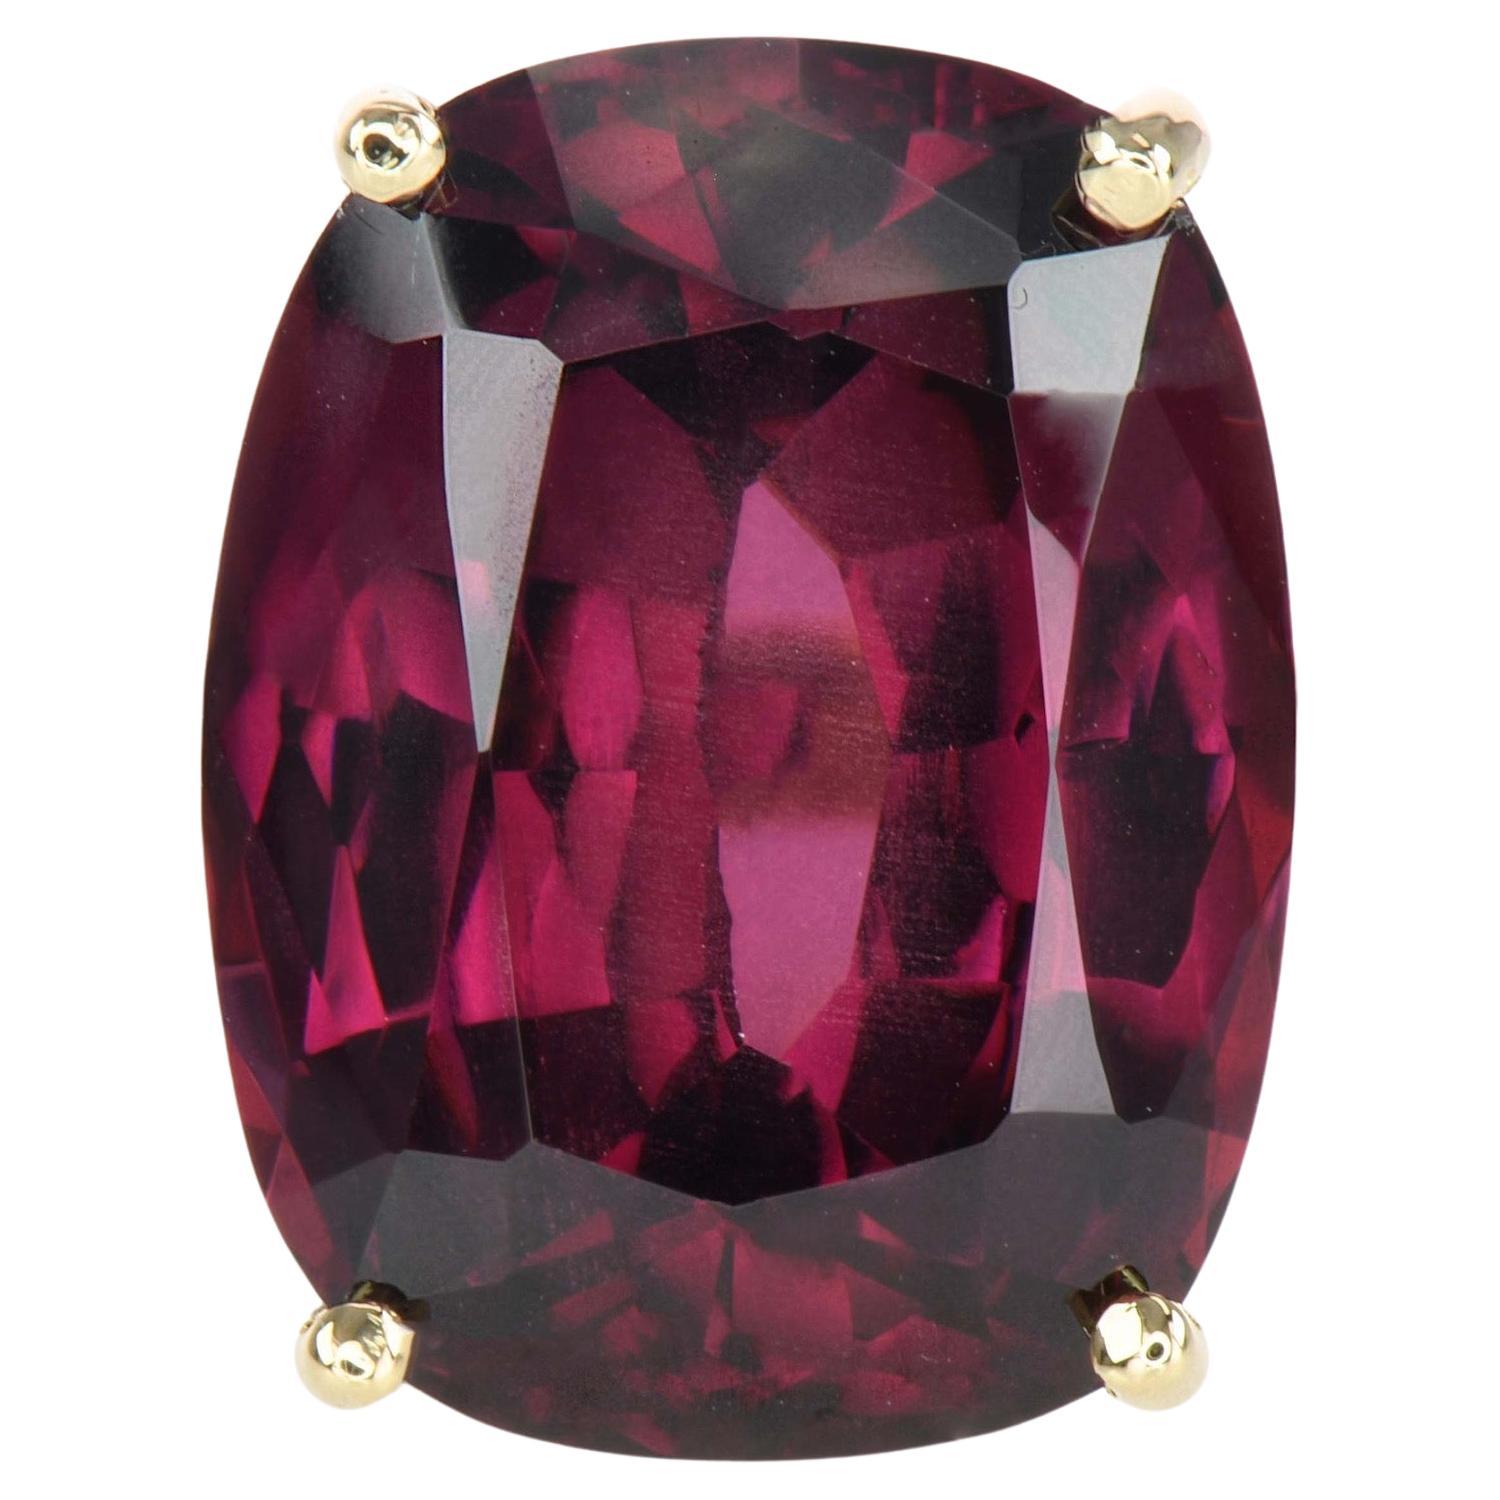 Rhodolite Solitaire Ring

Creator: Carson Gray Jewels
Ring Size: 6.5
Metal: 18KT Yellow Gold
Stone: Rhodolite
Stone Cut: Cushion Brilliant
Weight: 10.66 Carats
Style: Statement Ring
Place of Origin: Tanzania
Period: Modern


This virtually flawless